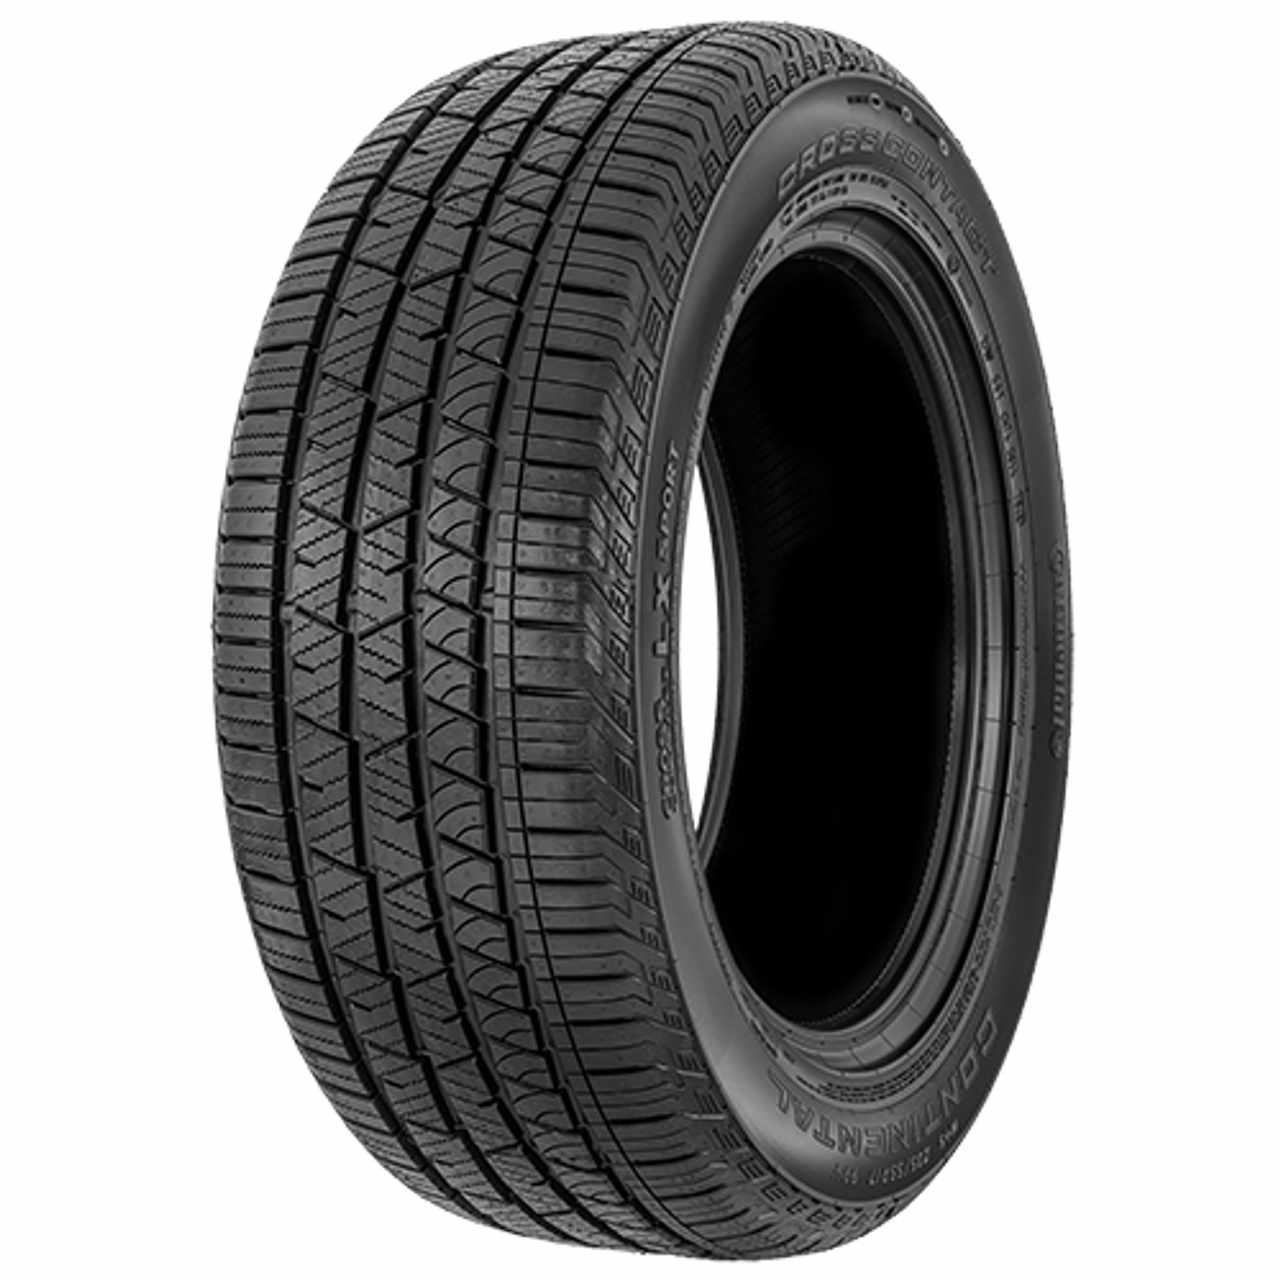 CONTINENTAL CROSSCONTACT LX SPORT (MO) (EVc) 315/40R21 111H FR BSW